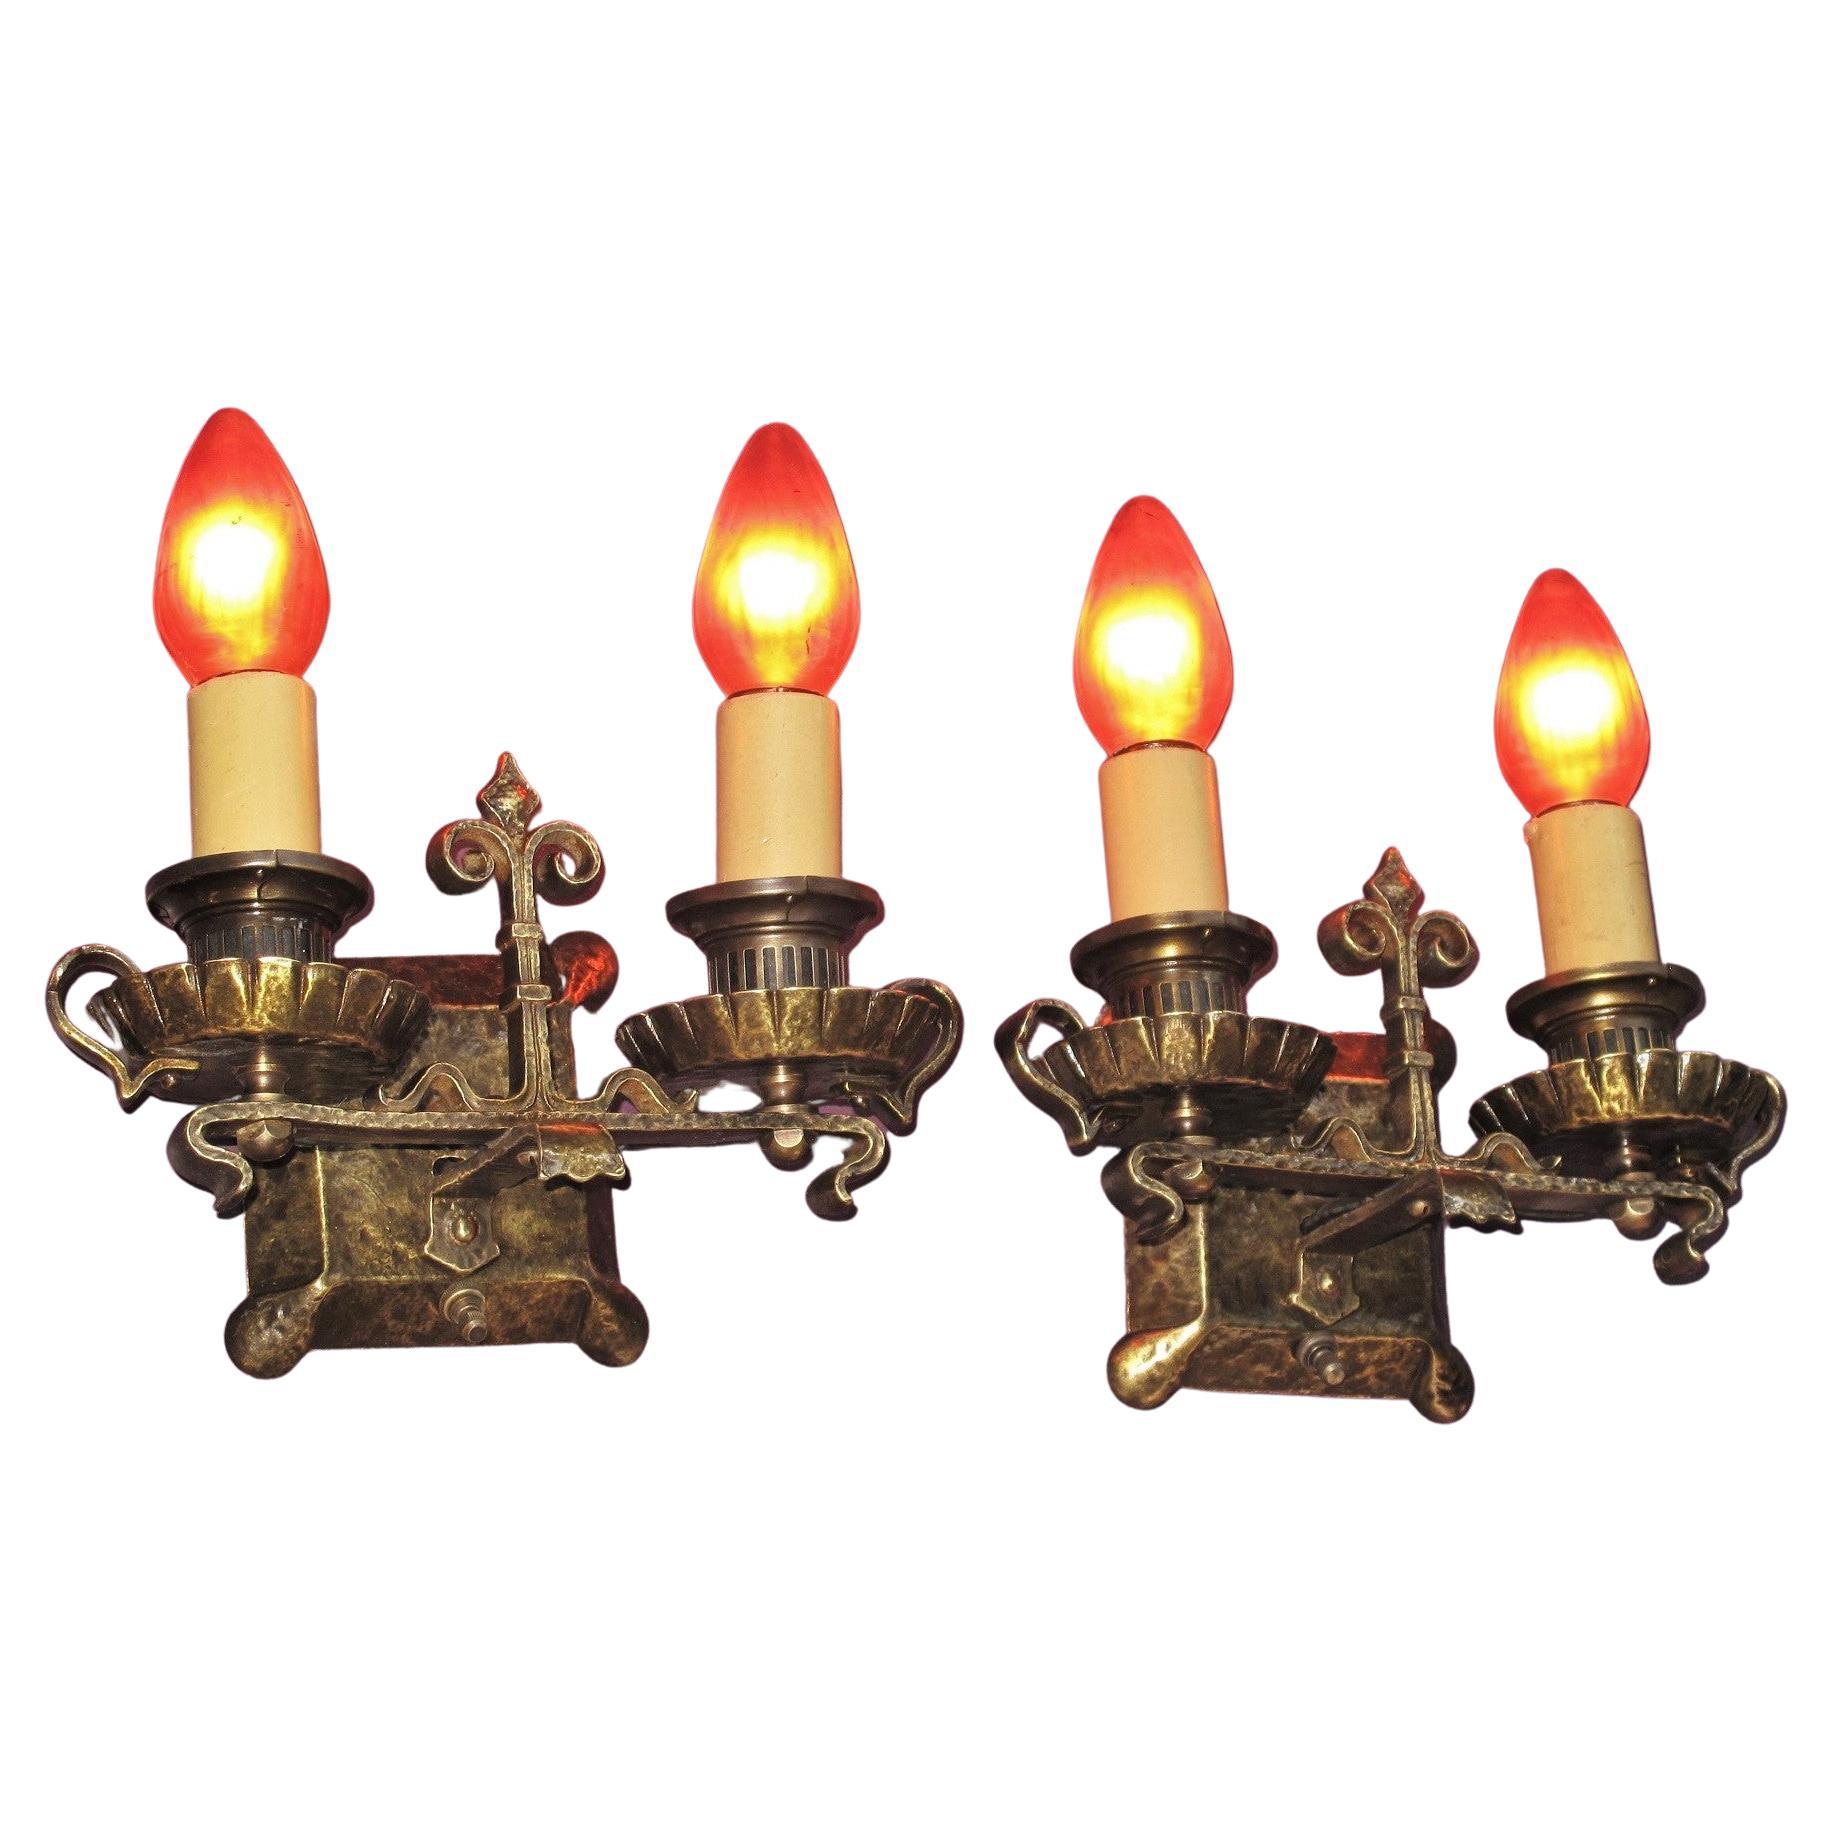 Very Well Made 2 Arm Solid Brass Revival Sconces Pair For Sale